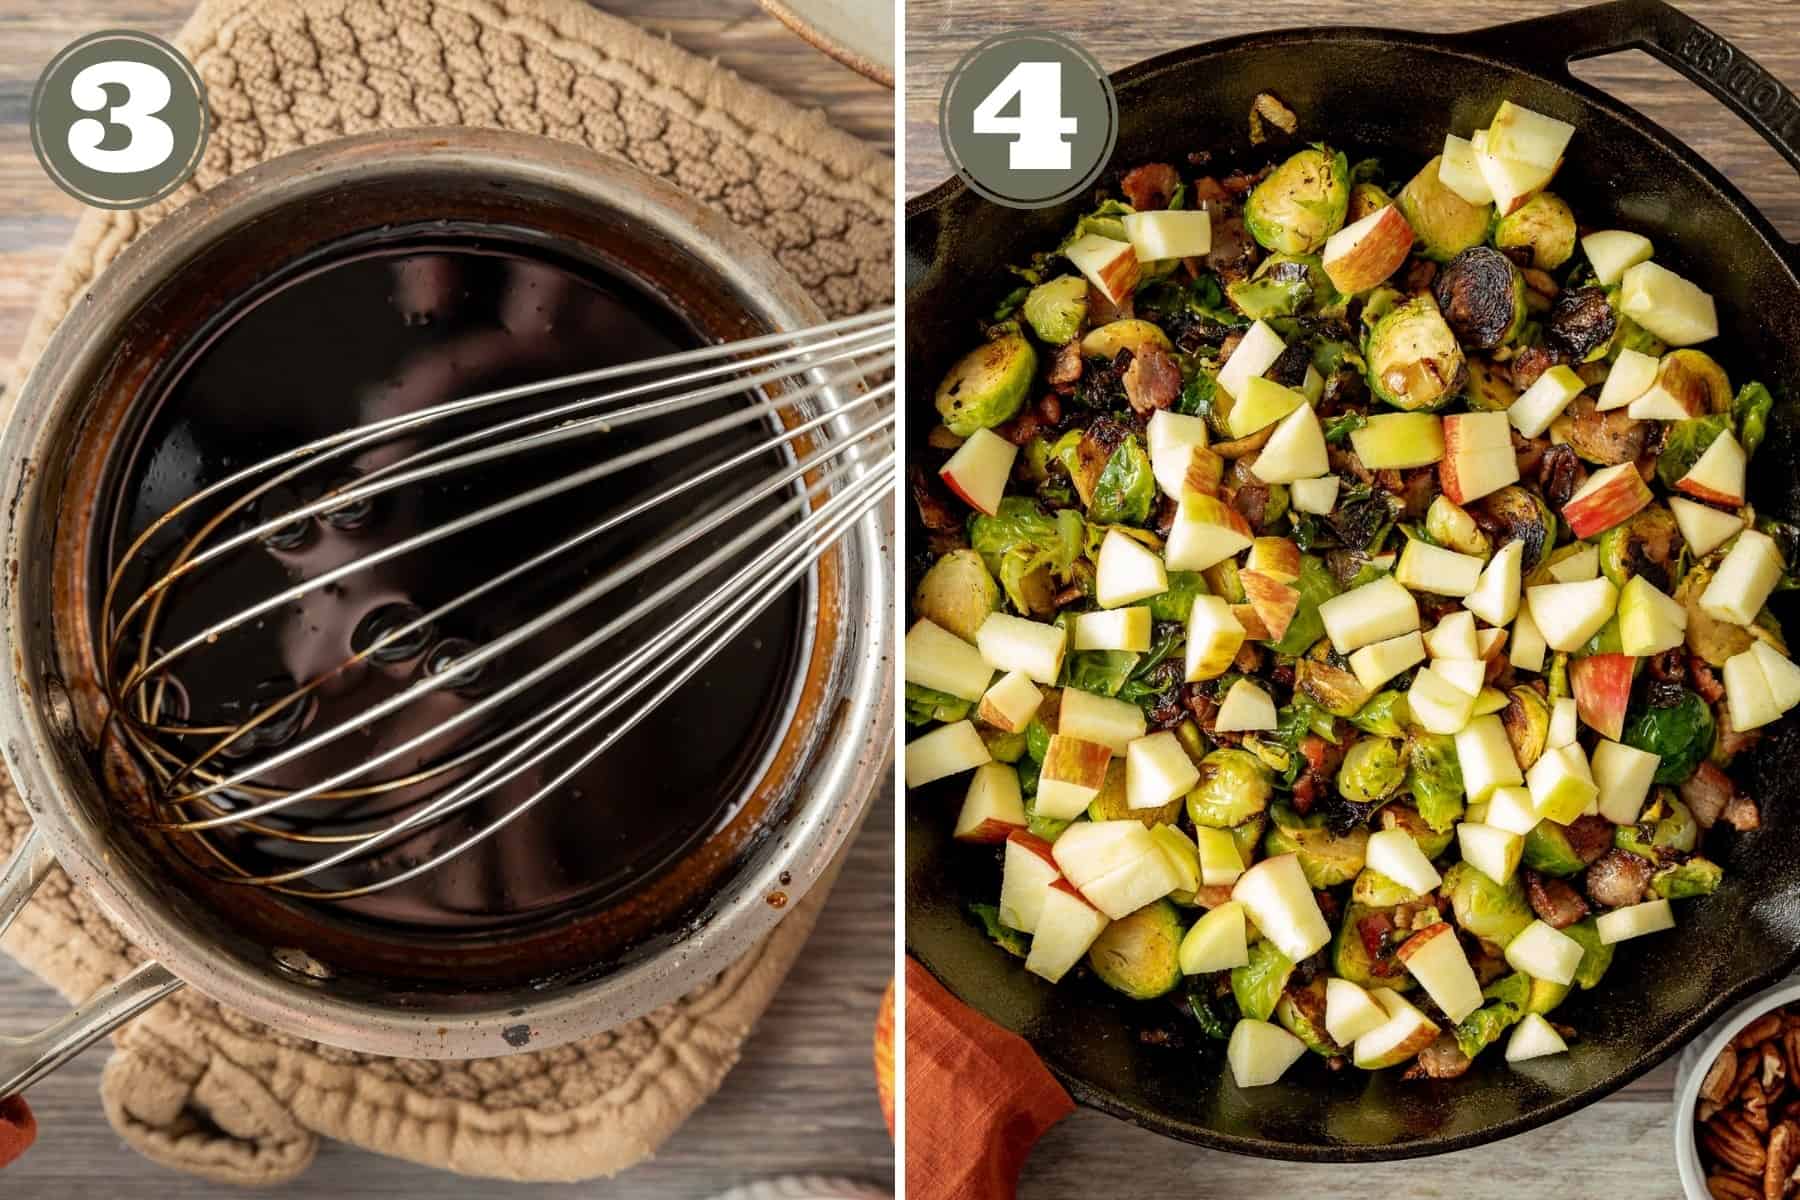 Process shots of balsamic glaze in a pan and a skillet of brussels sprouts and apples.